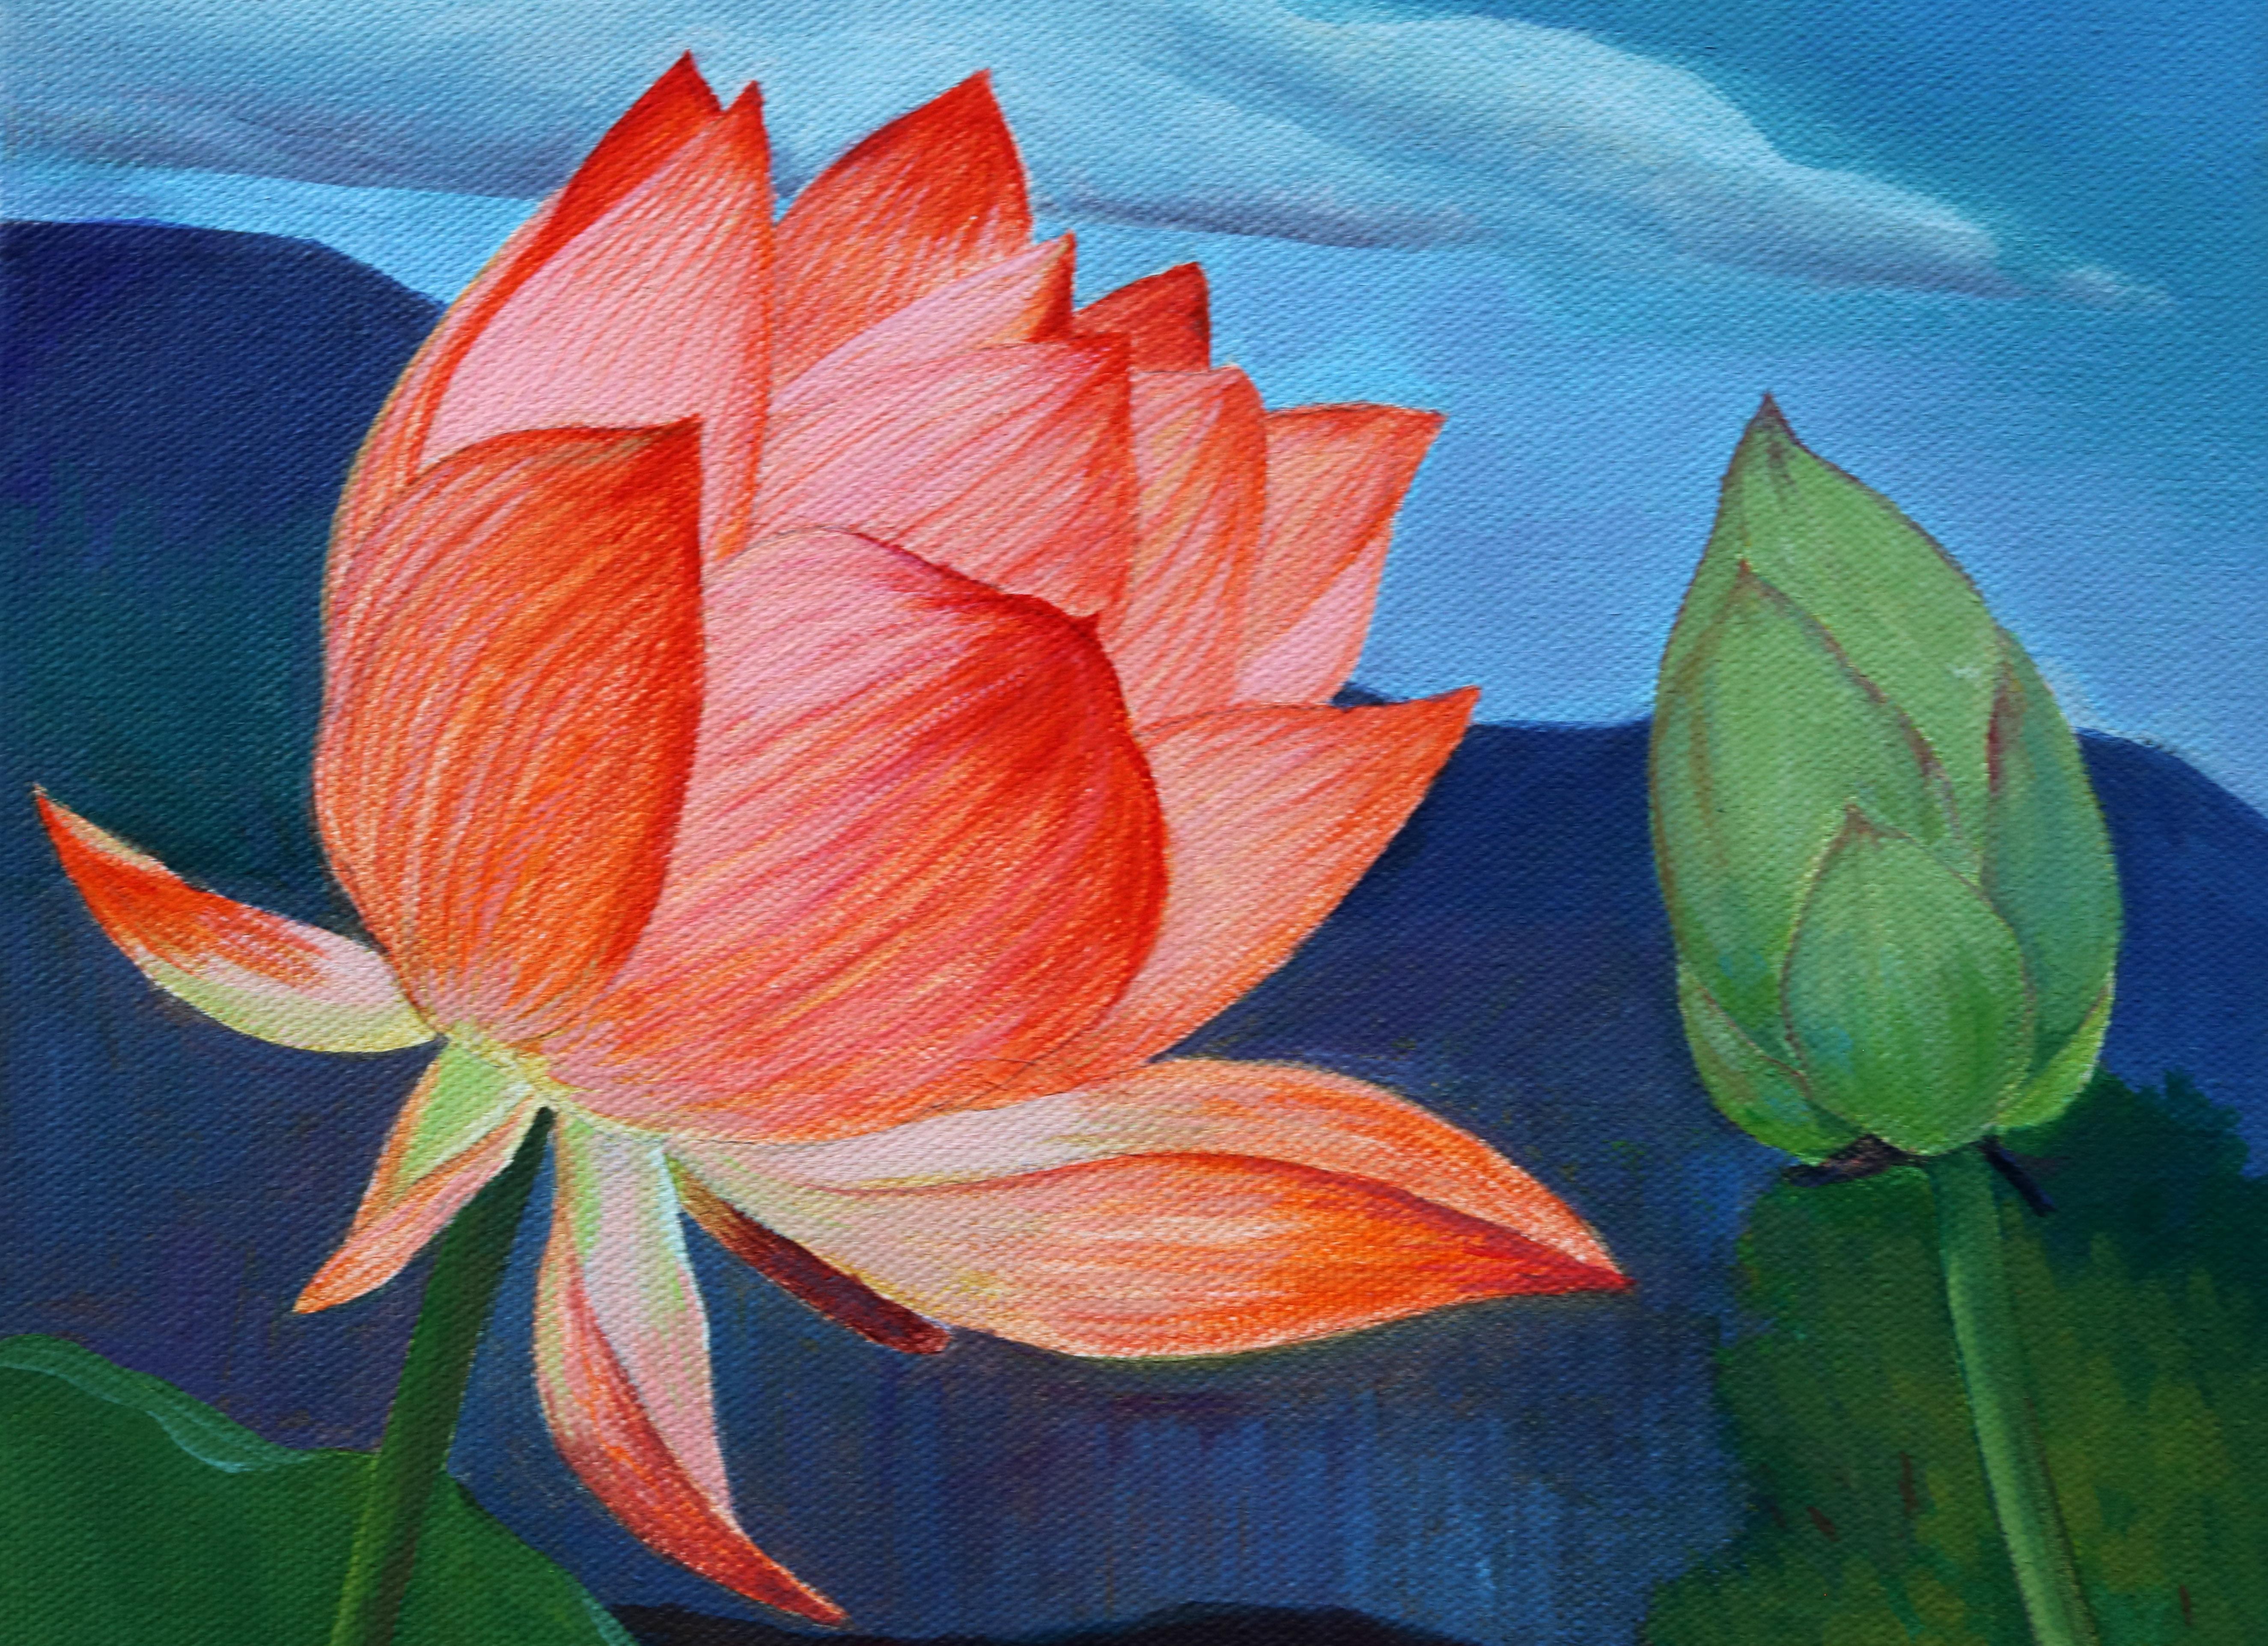 <p>Artist Comments<br>Artist Guigen Zha pictures a plump red lotus blooming opposite a developing bud. He paints in his distinct style of realism that preserves a sense of whimsical introspection. The flowers raise their heads high from the pond,